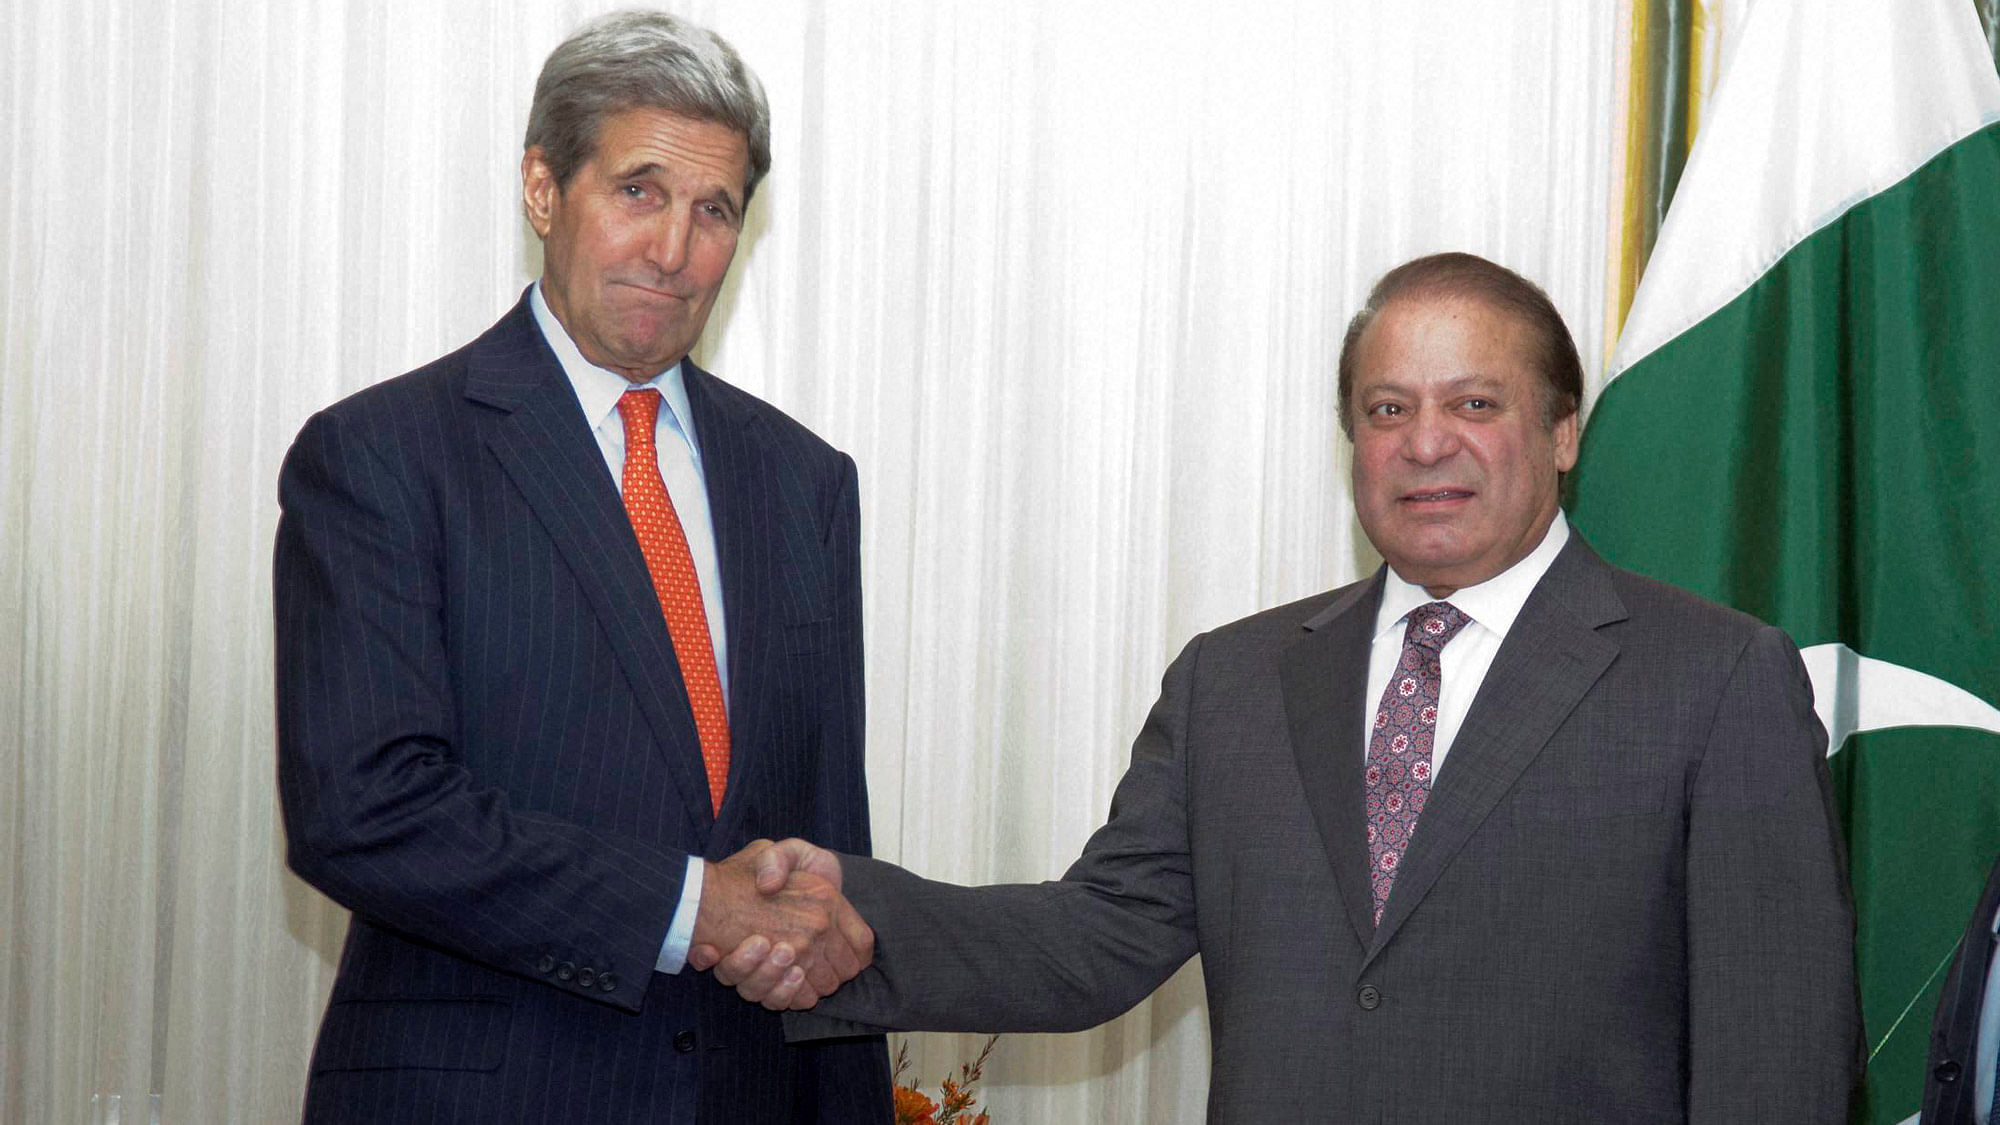 US Secretary of State John Kerry shakes hands with Pakistani Prime Minister Nawaz Sharif during their meeting at  Blair House in Washington, Wednesday, 21 October, 2015. (Photo: PTI)